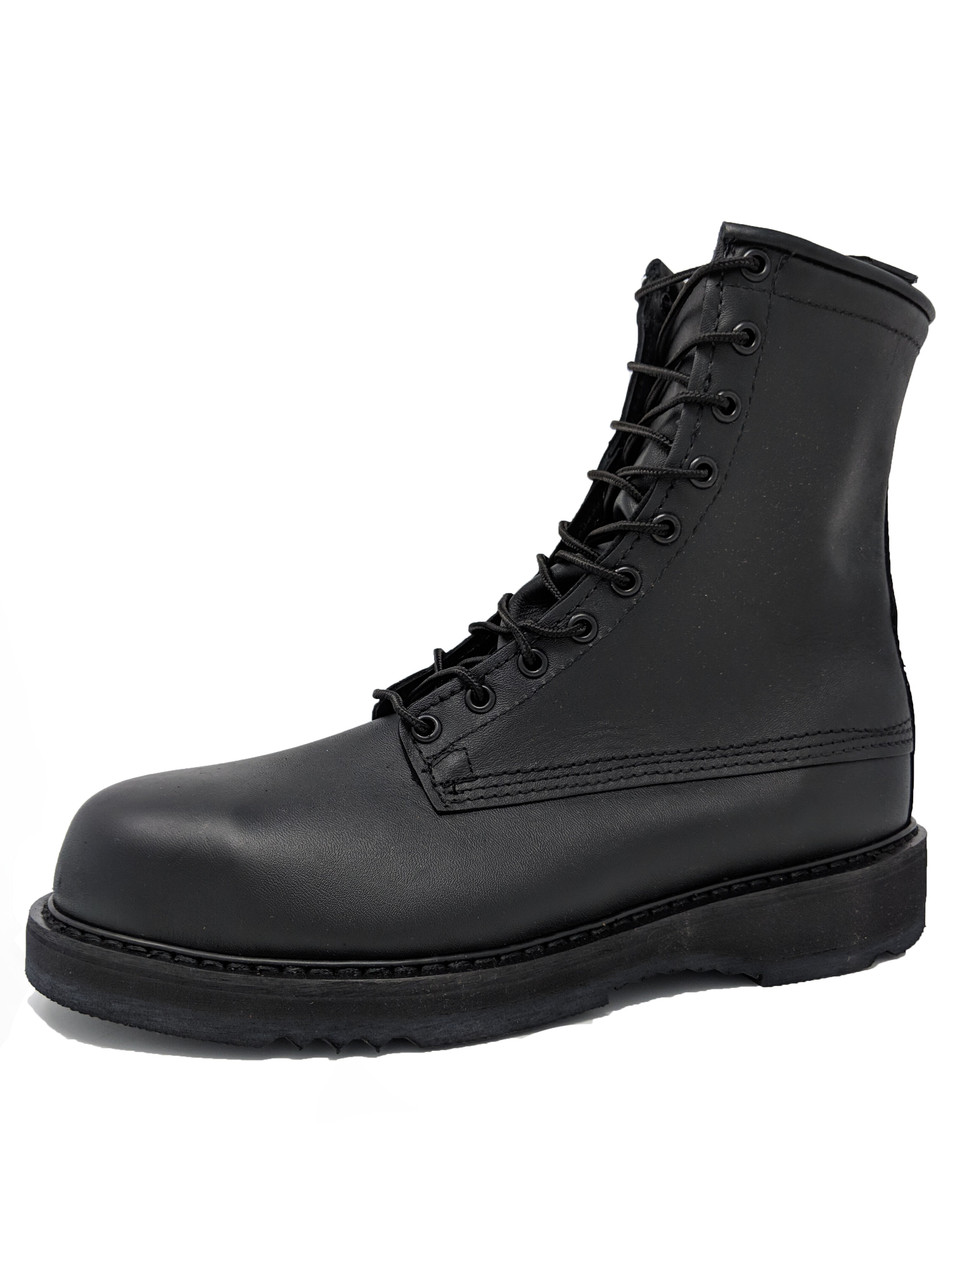 army navy shoes